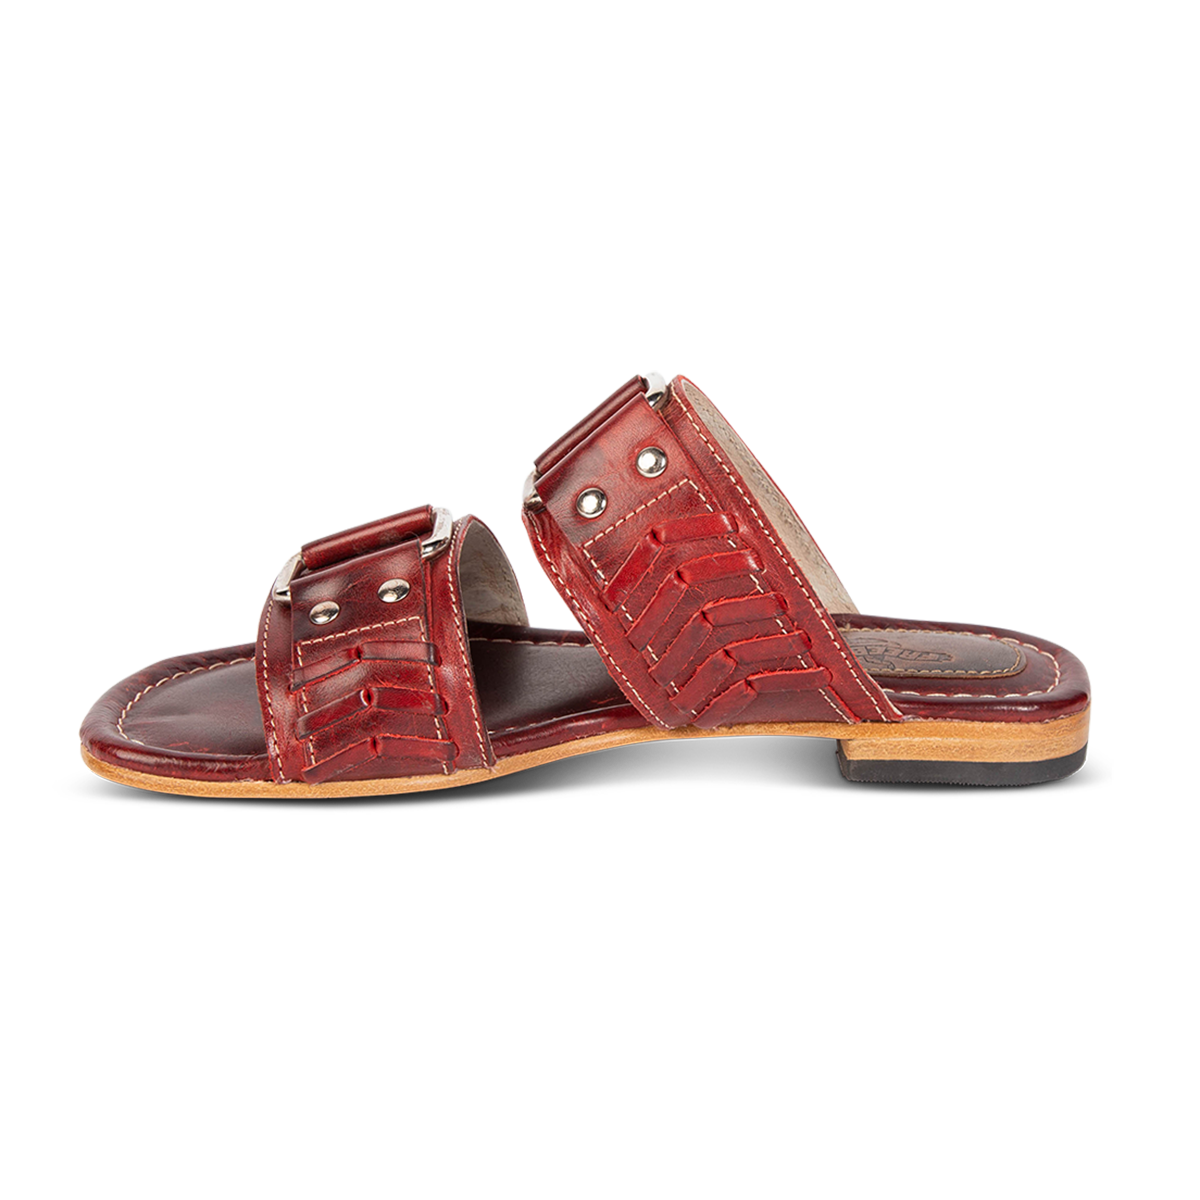 Inside view showing FREEBIRD woven leather detailed foot straps on women's Sage red low heeled slip-on sandal